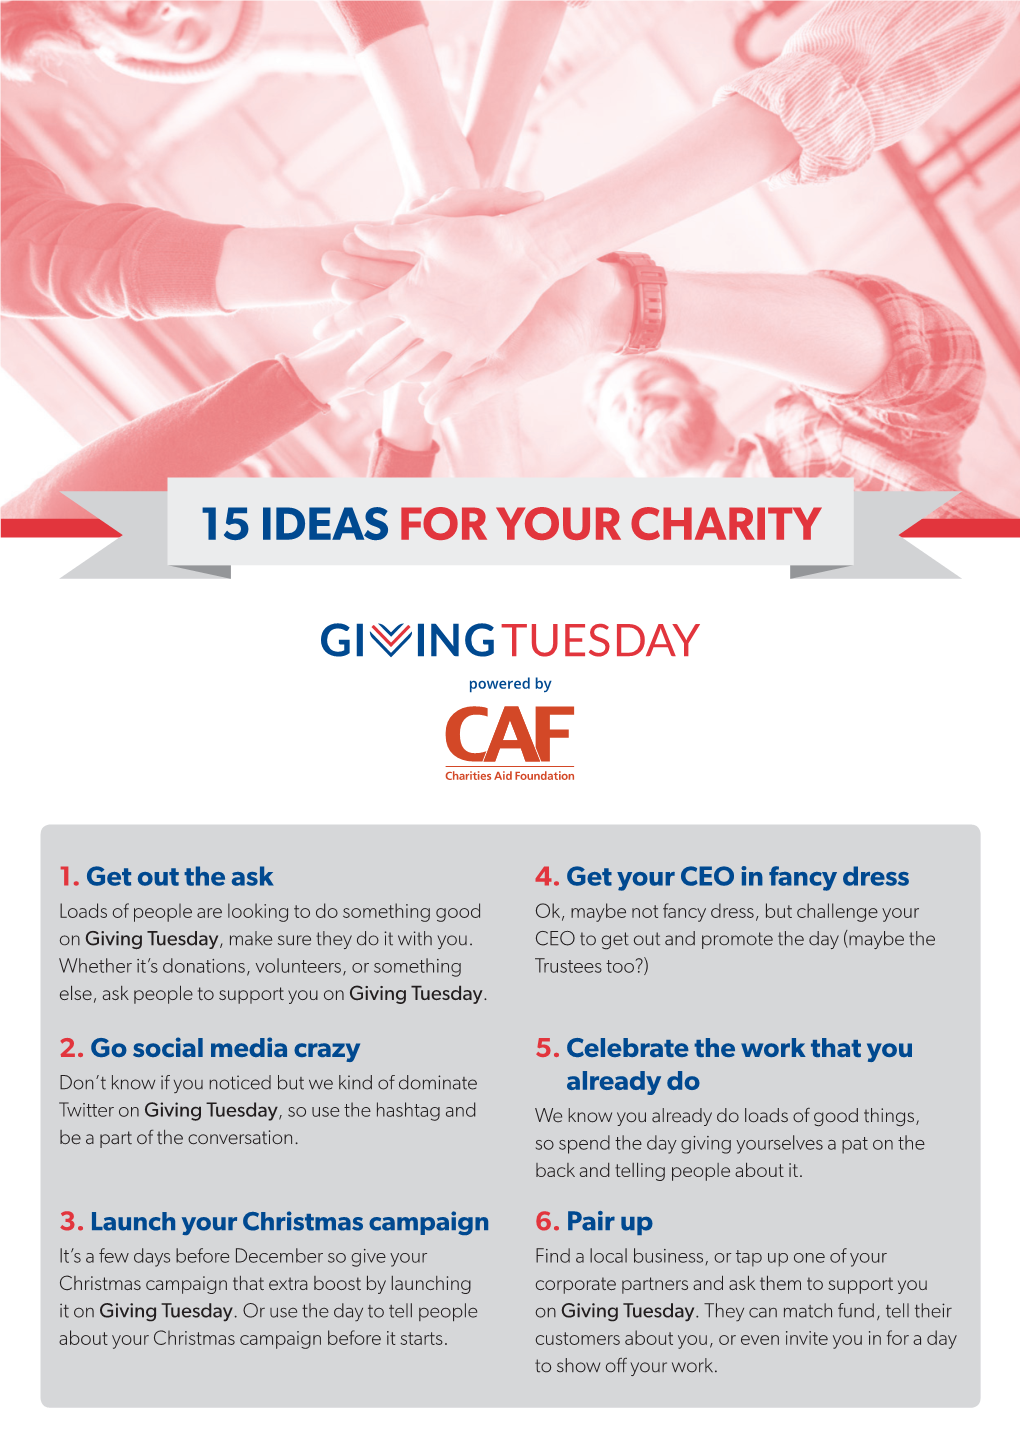 15 Ideas for Your Charity